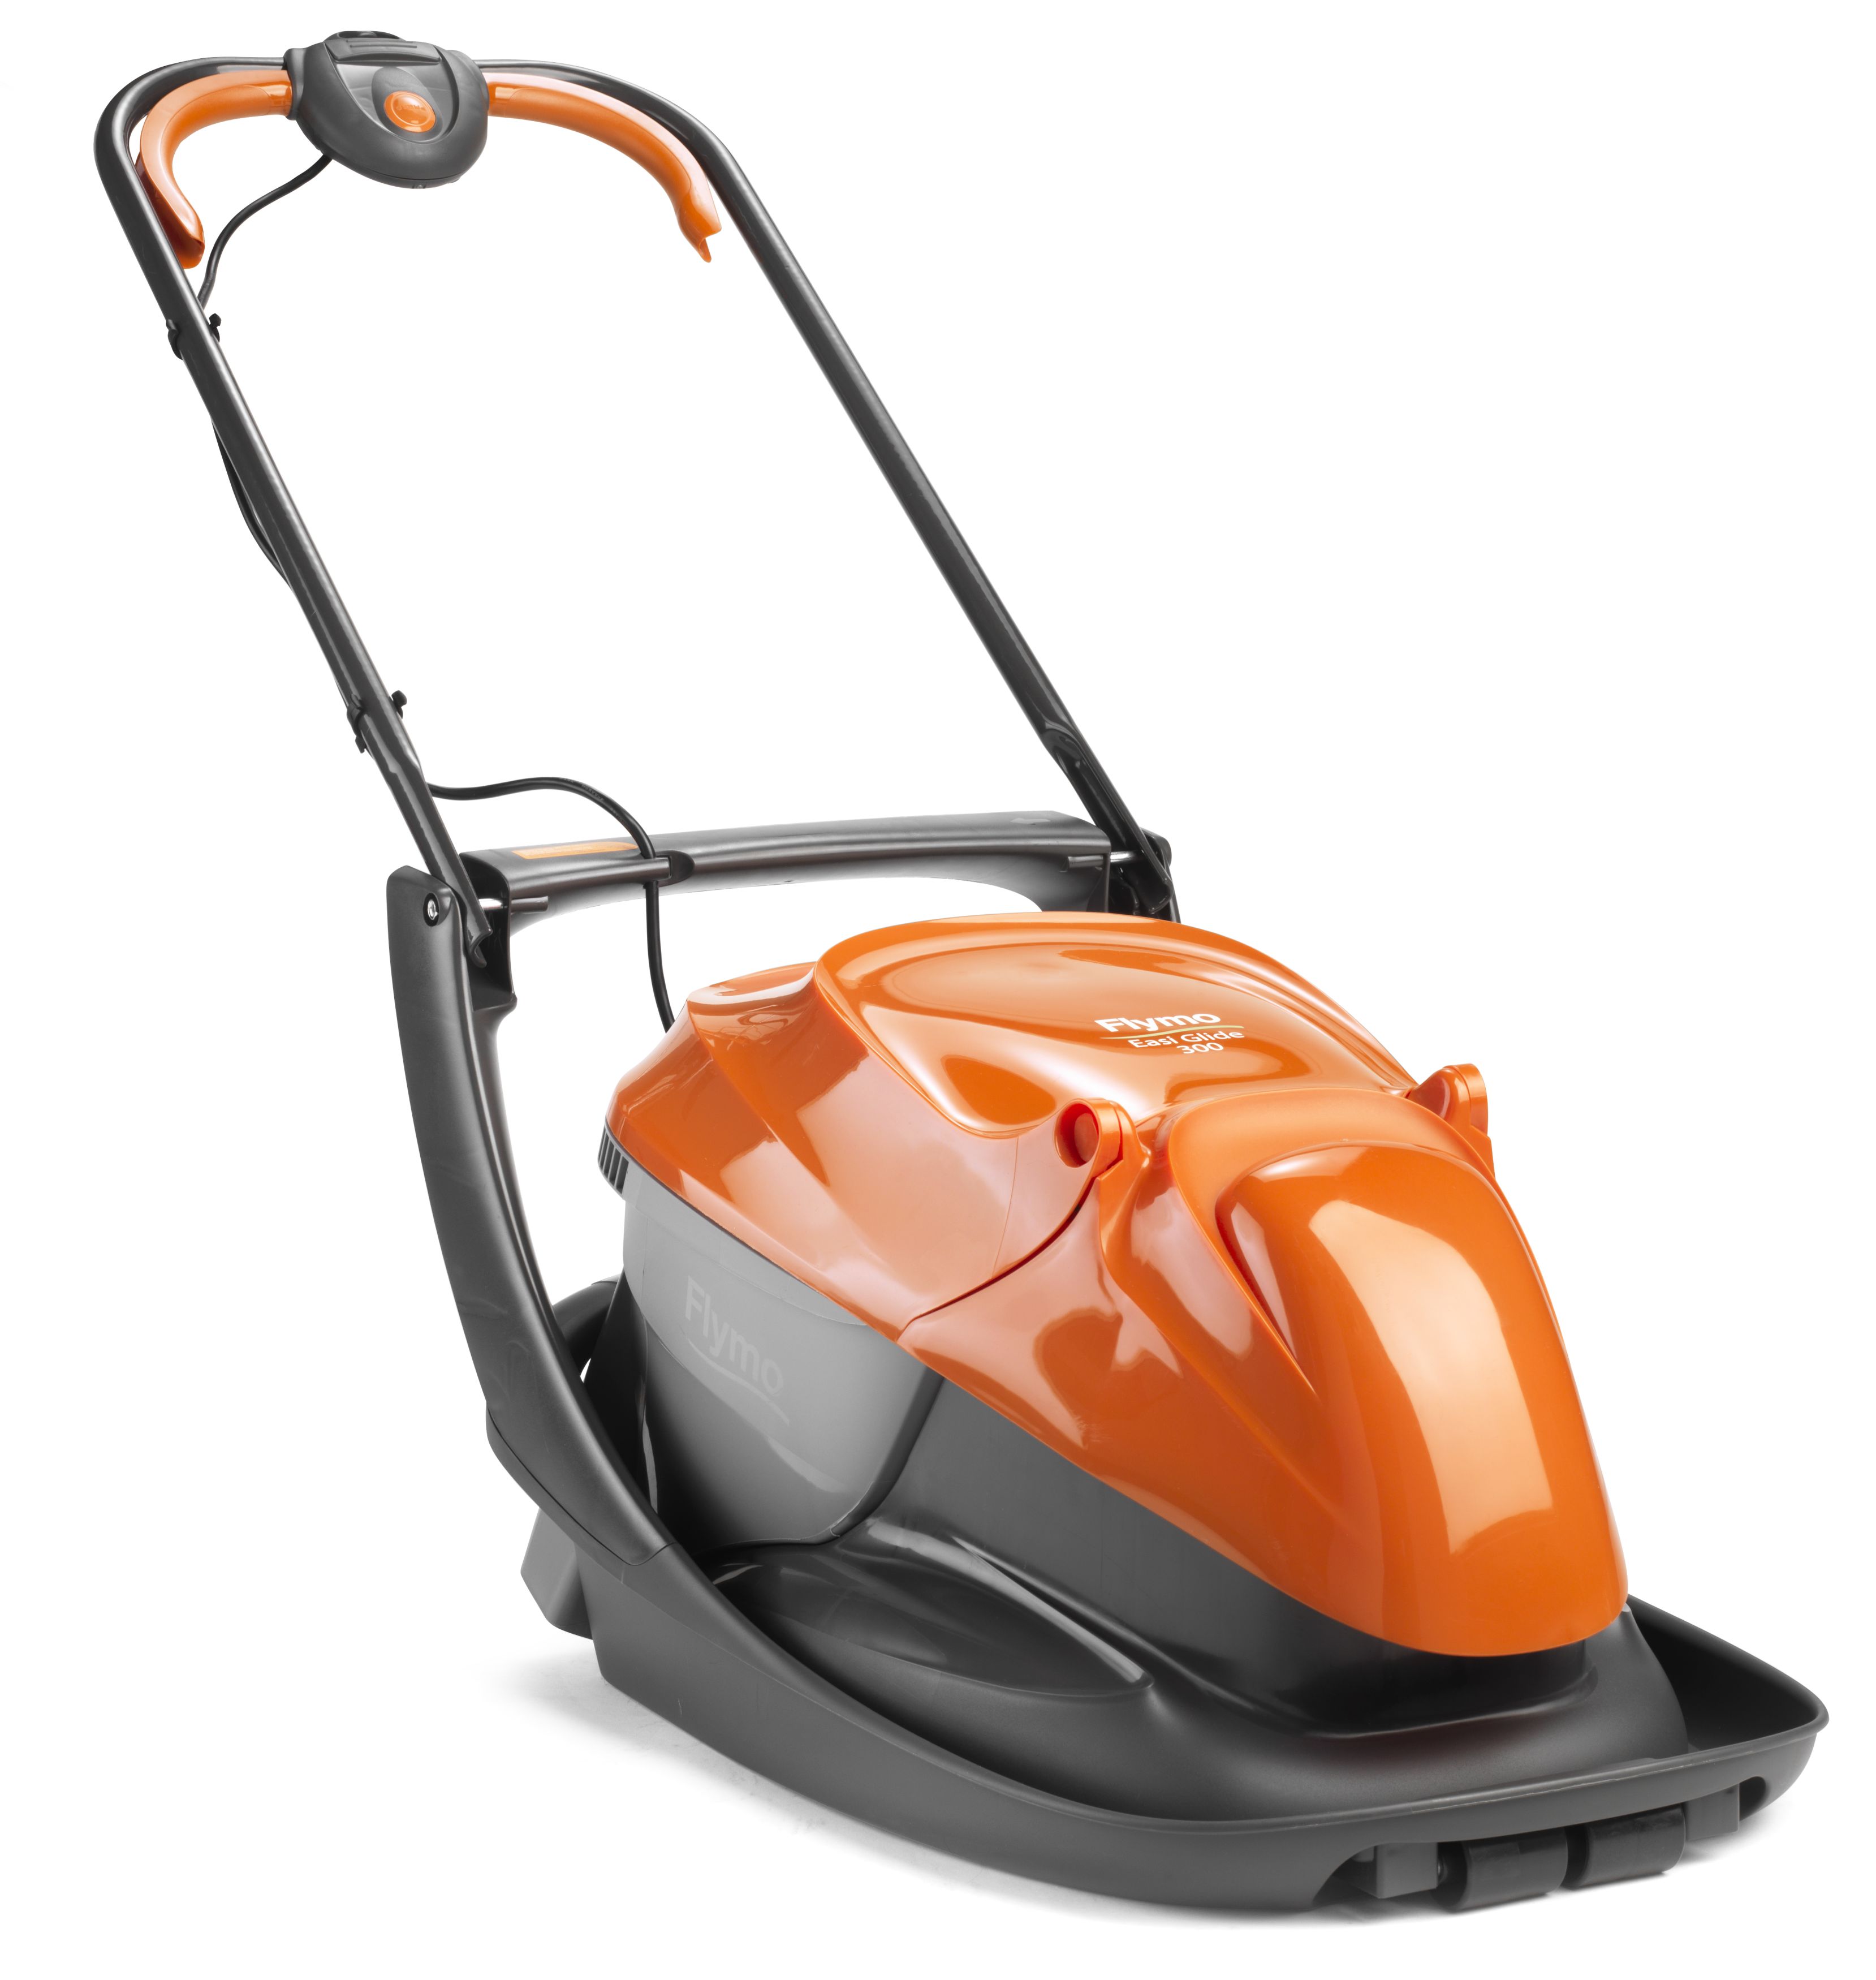 Image of Flymo Easi Glide 300 30cm Electric Hover Collect Lawnmower